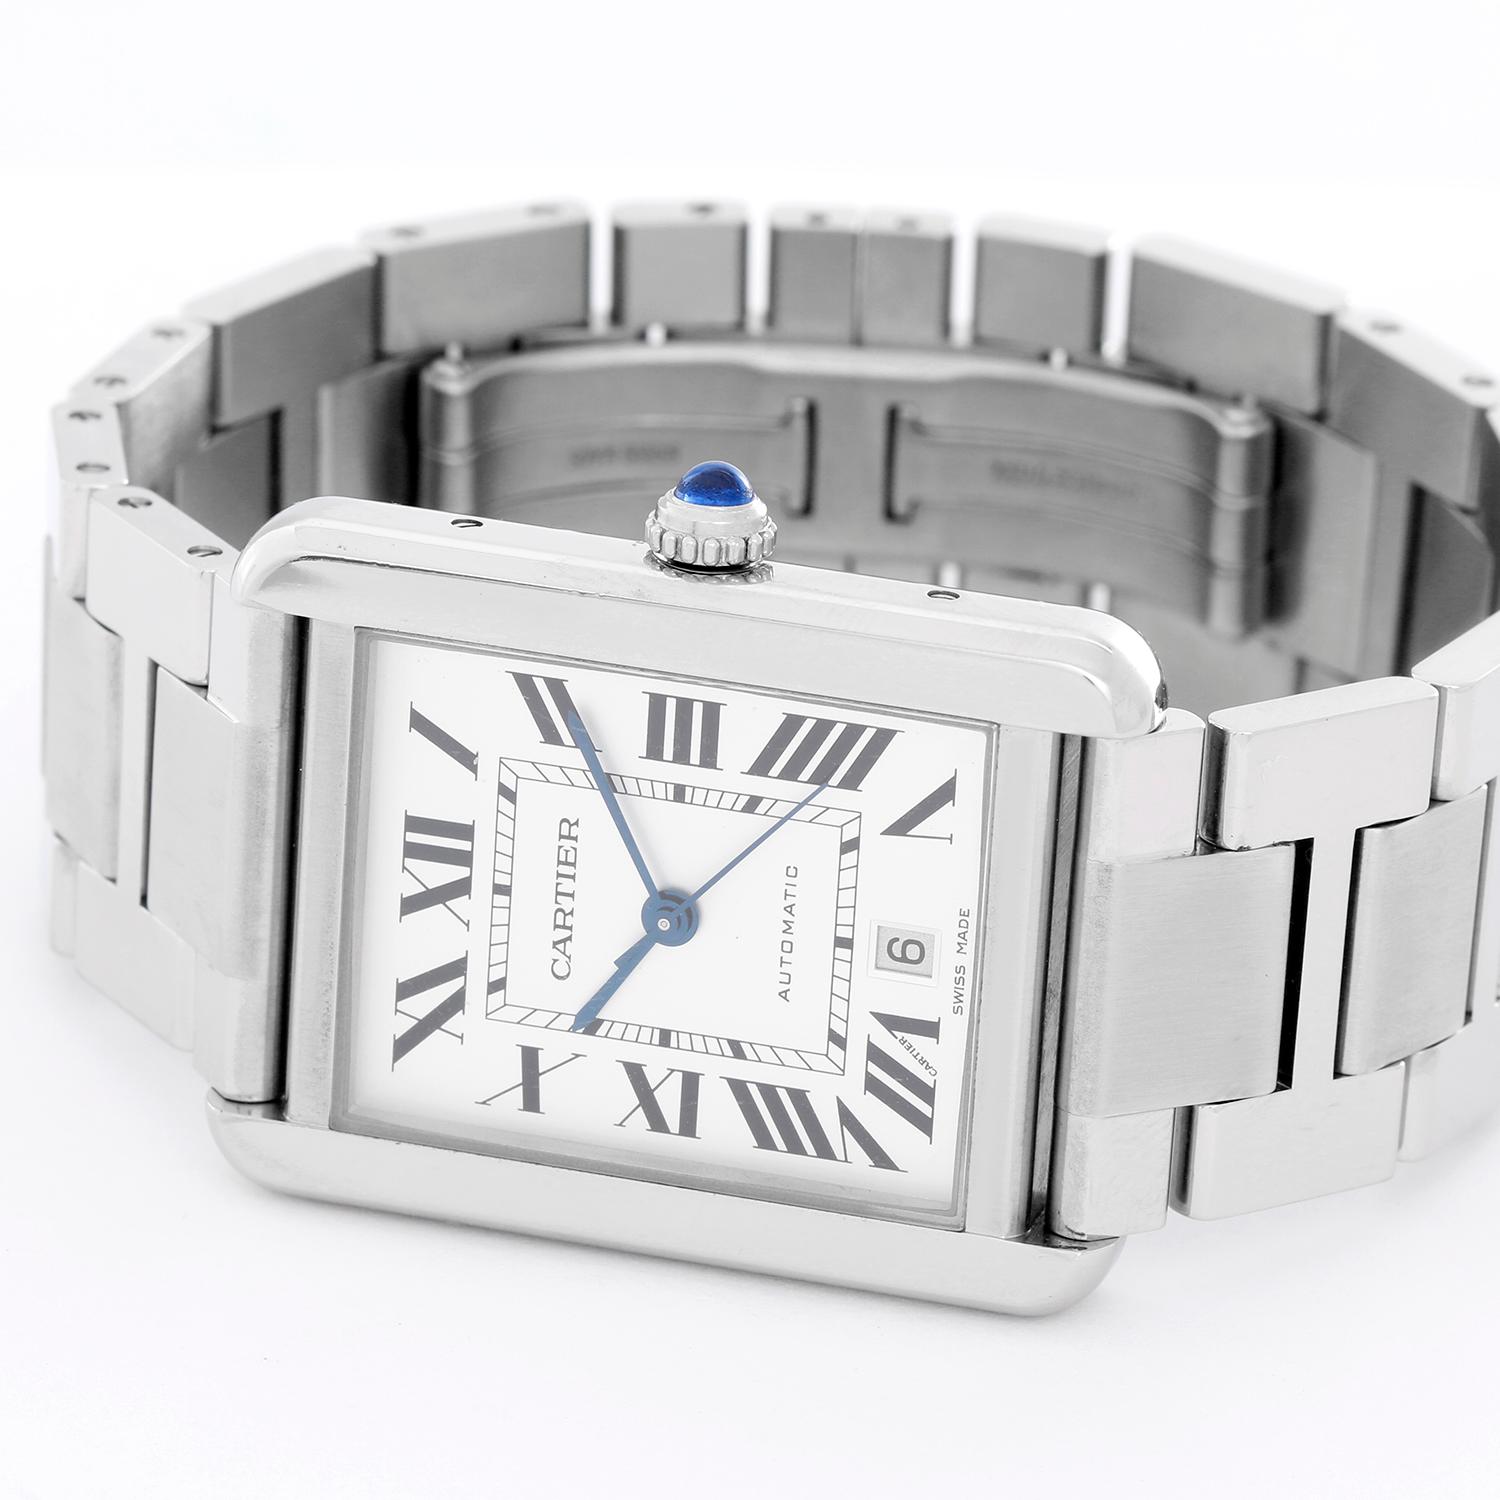 Cartier Men's Extra Large Tank Solo Stainless Steel Watch W5200028 - Automatic.  Stainless steel case ( 31 mm x 41 mm ). Silver dial with black Roman numerals with date at 6 o'clock.  Stainless steel with double deployant buckle. Pre-owned with